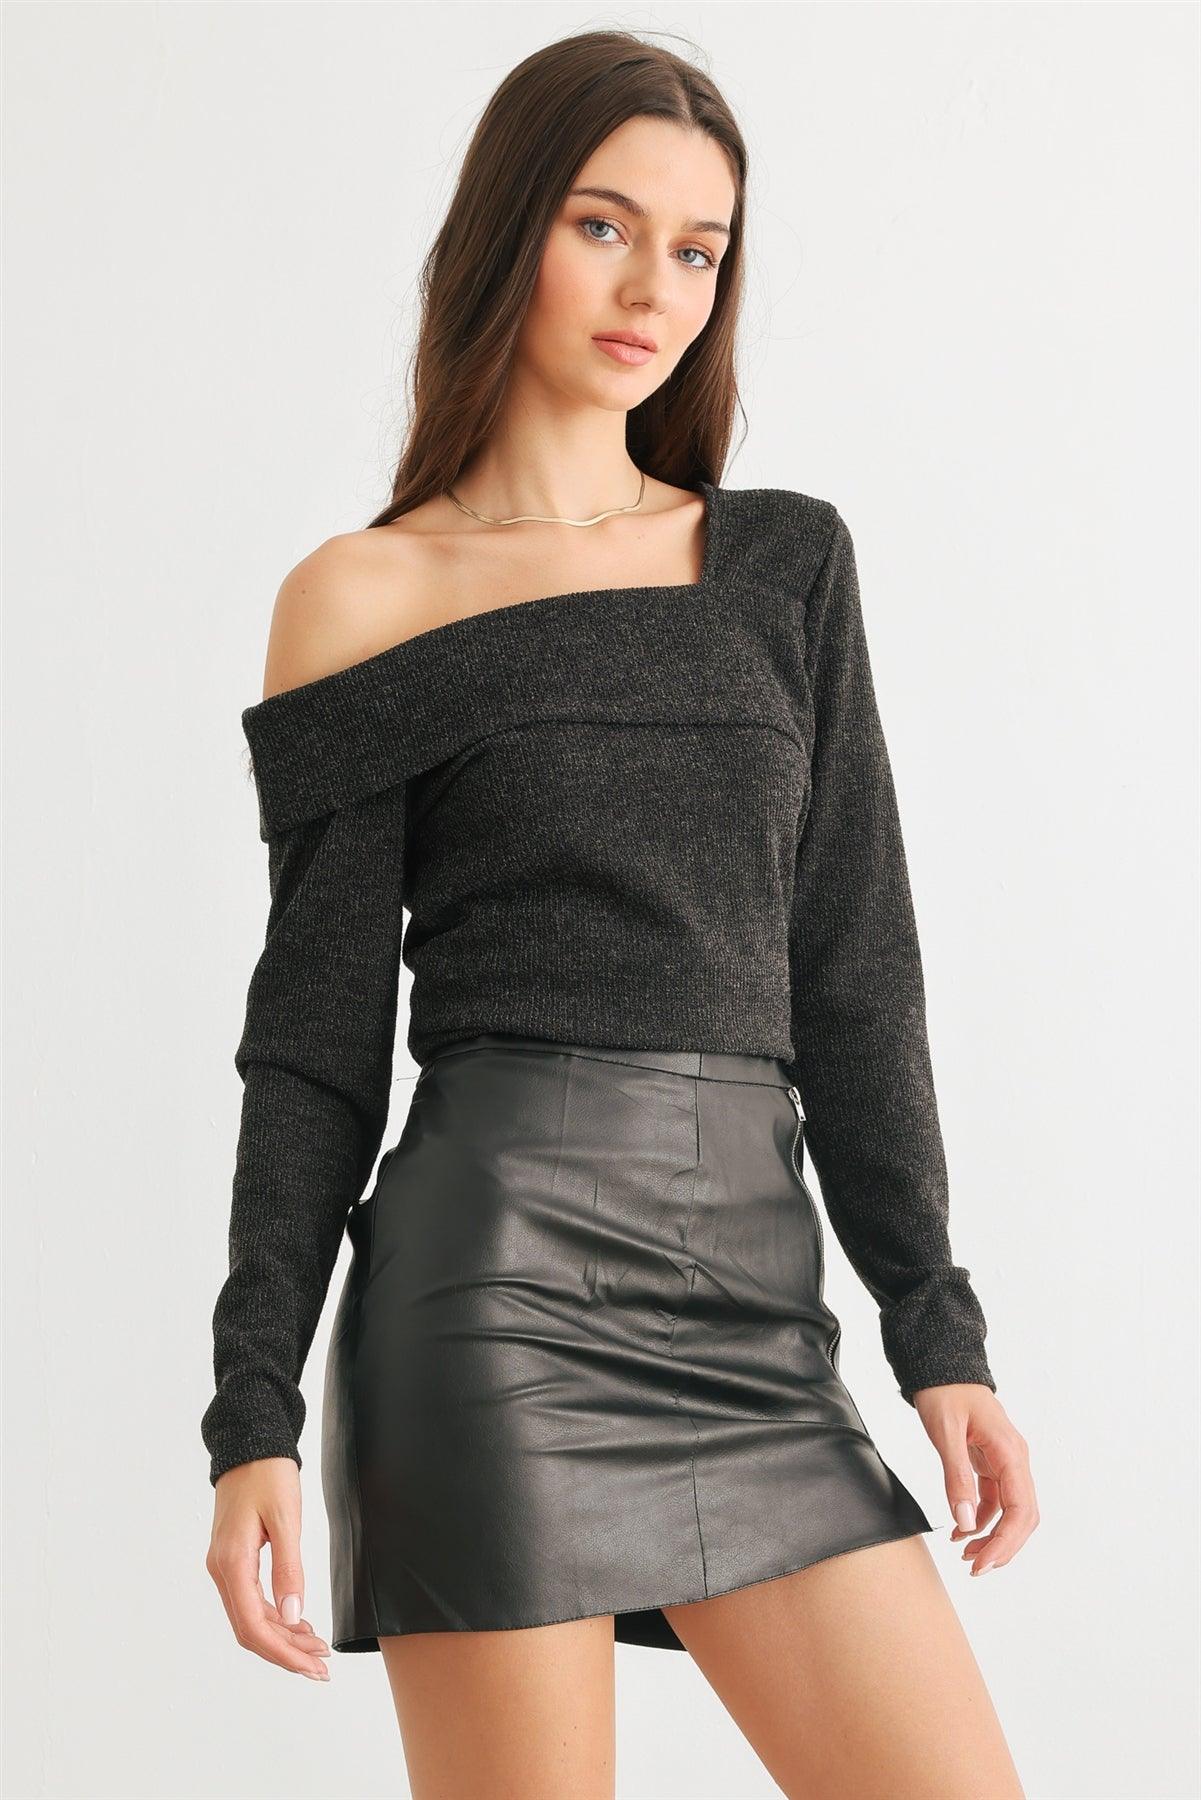 Charcoal Knit One Shoulder Long Sleeve Top /2-2-2